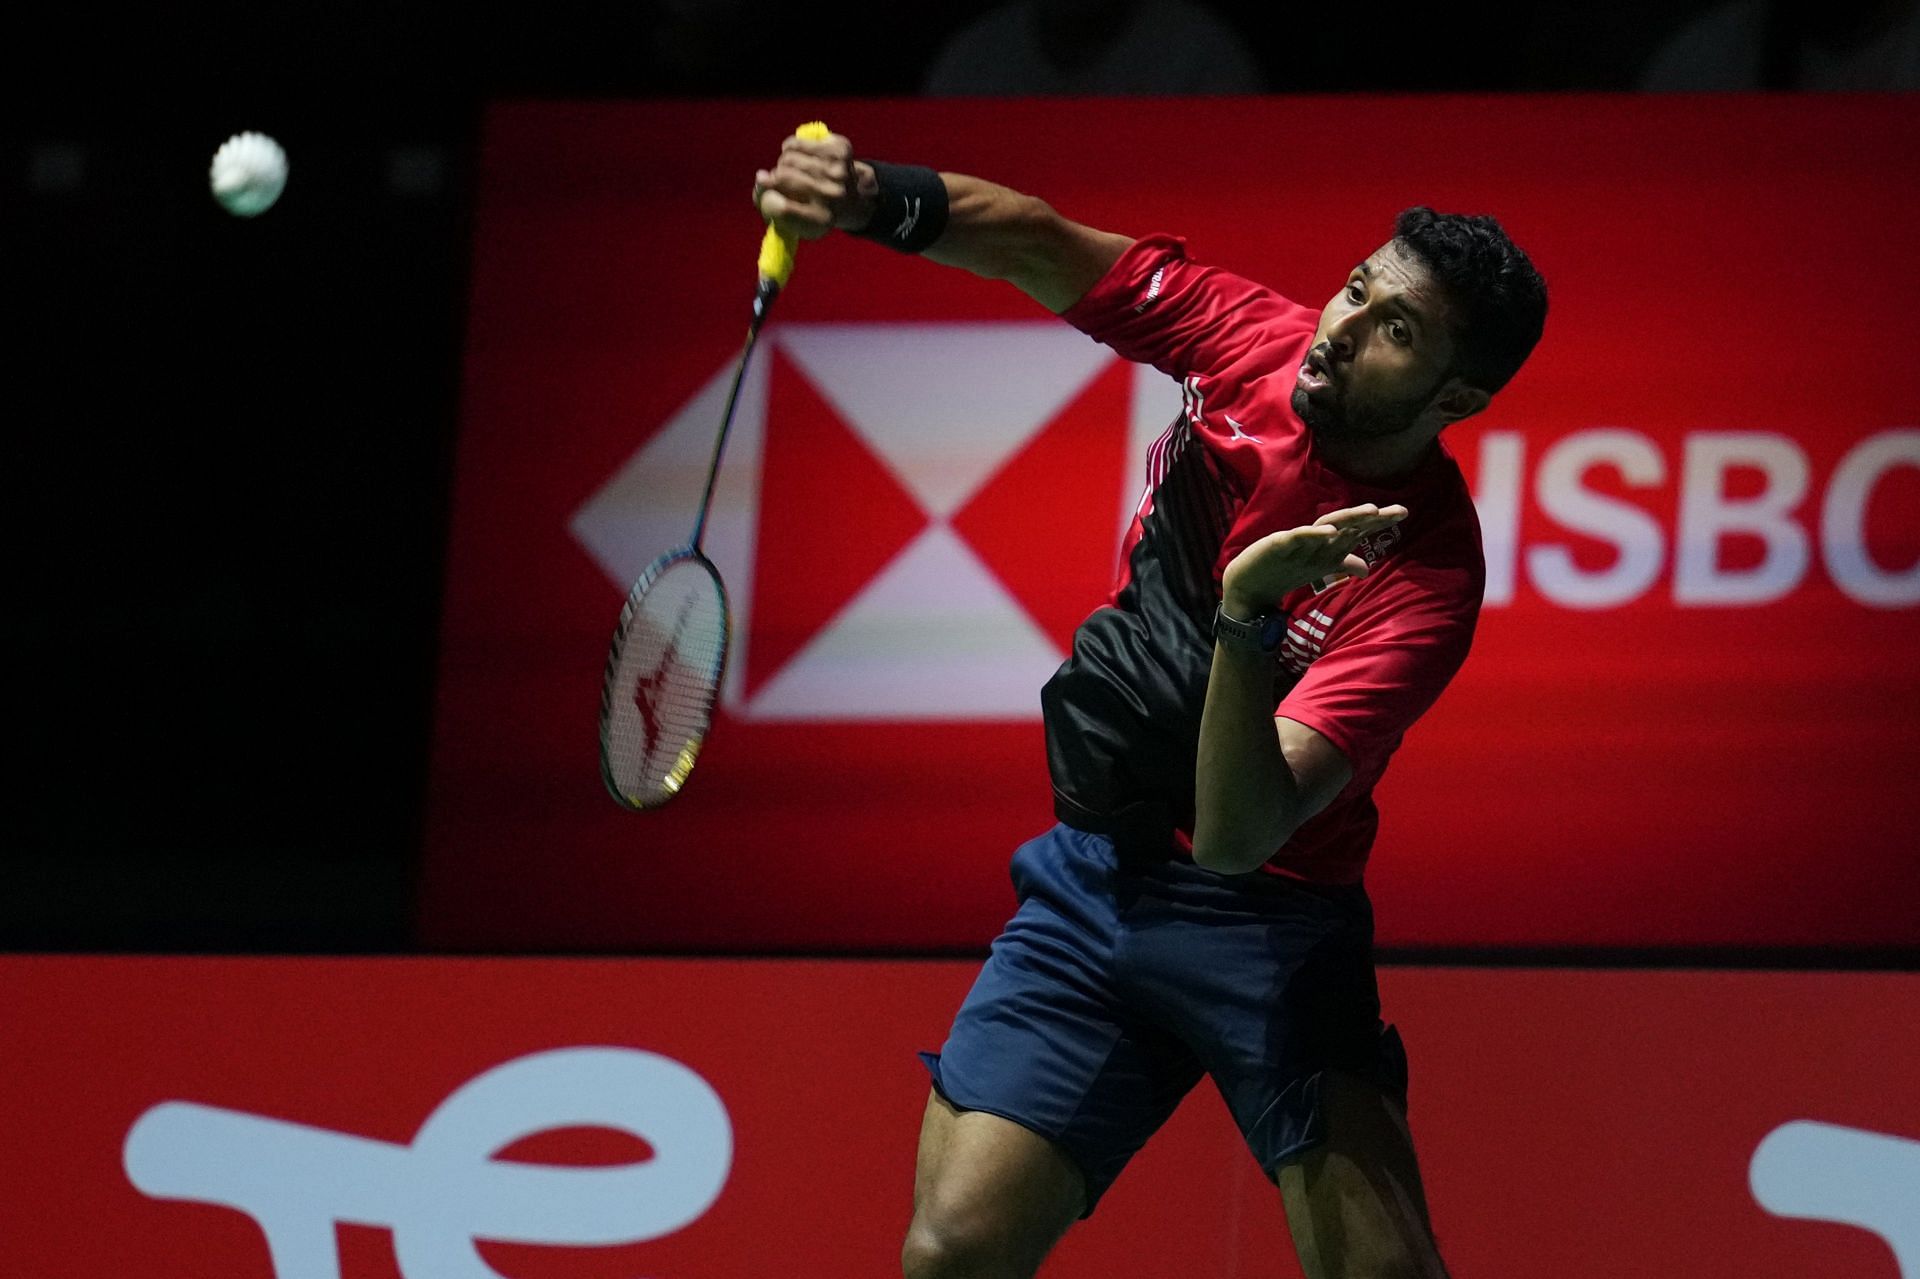 BWF World Tour Finals 2022 HS Prannoy vs Lu Guang Zu preview, head-to-head, prediction, where to watch and live streaming details